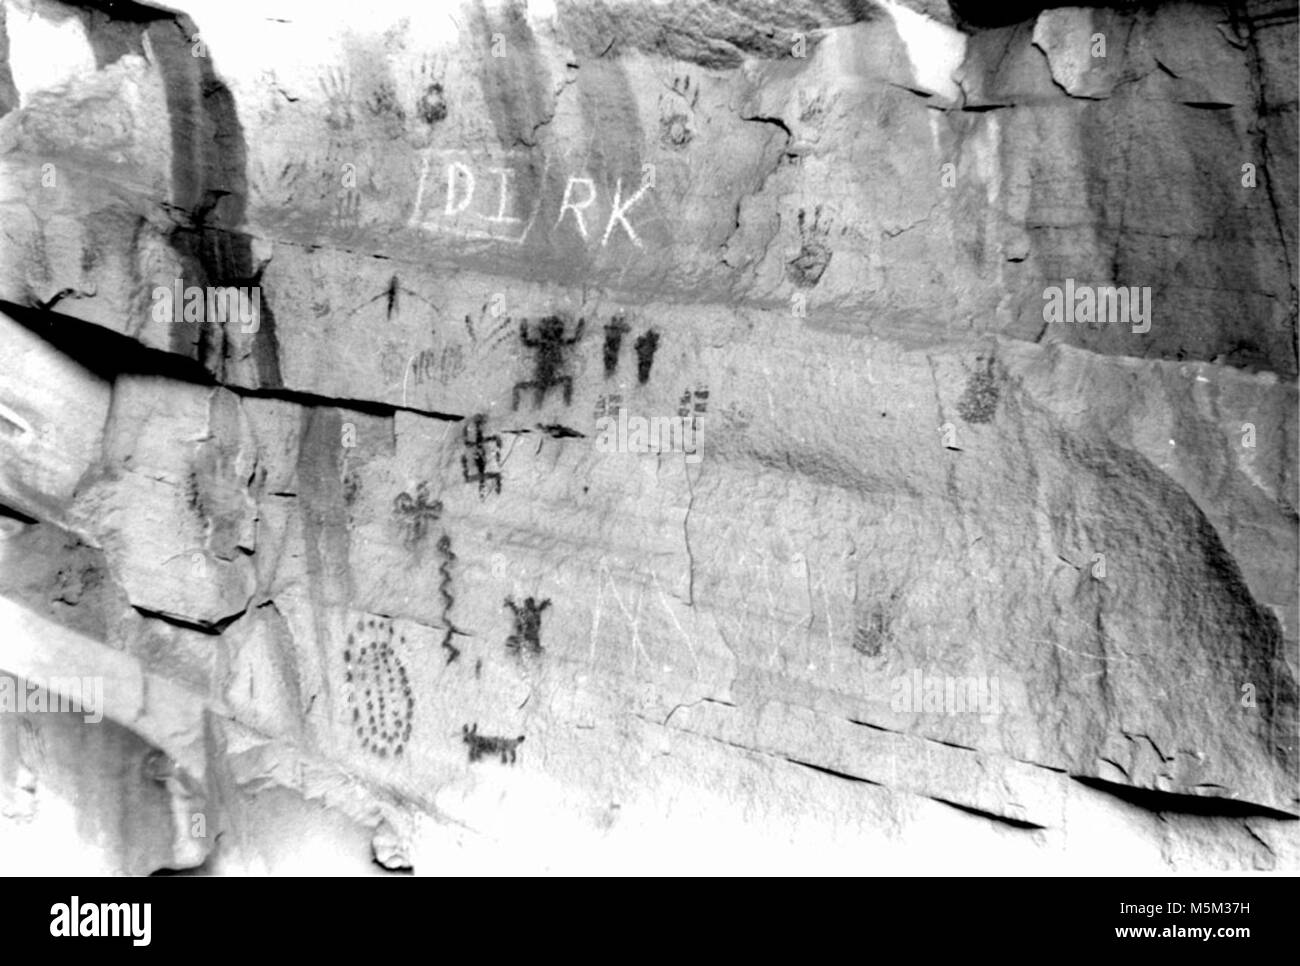 Grand Canyon Historic Bright Angel Trail Pictographs . PICTOGRAPH PANEL DEFACED BY GRAFFITI NEAR  TWO-MILE CORNER ON THE BRIGHT ANGEL TRAIL. 10 OCT 1977. Stock Photo